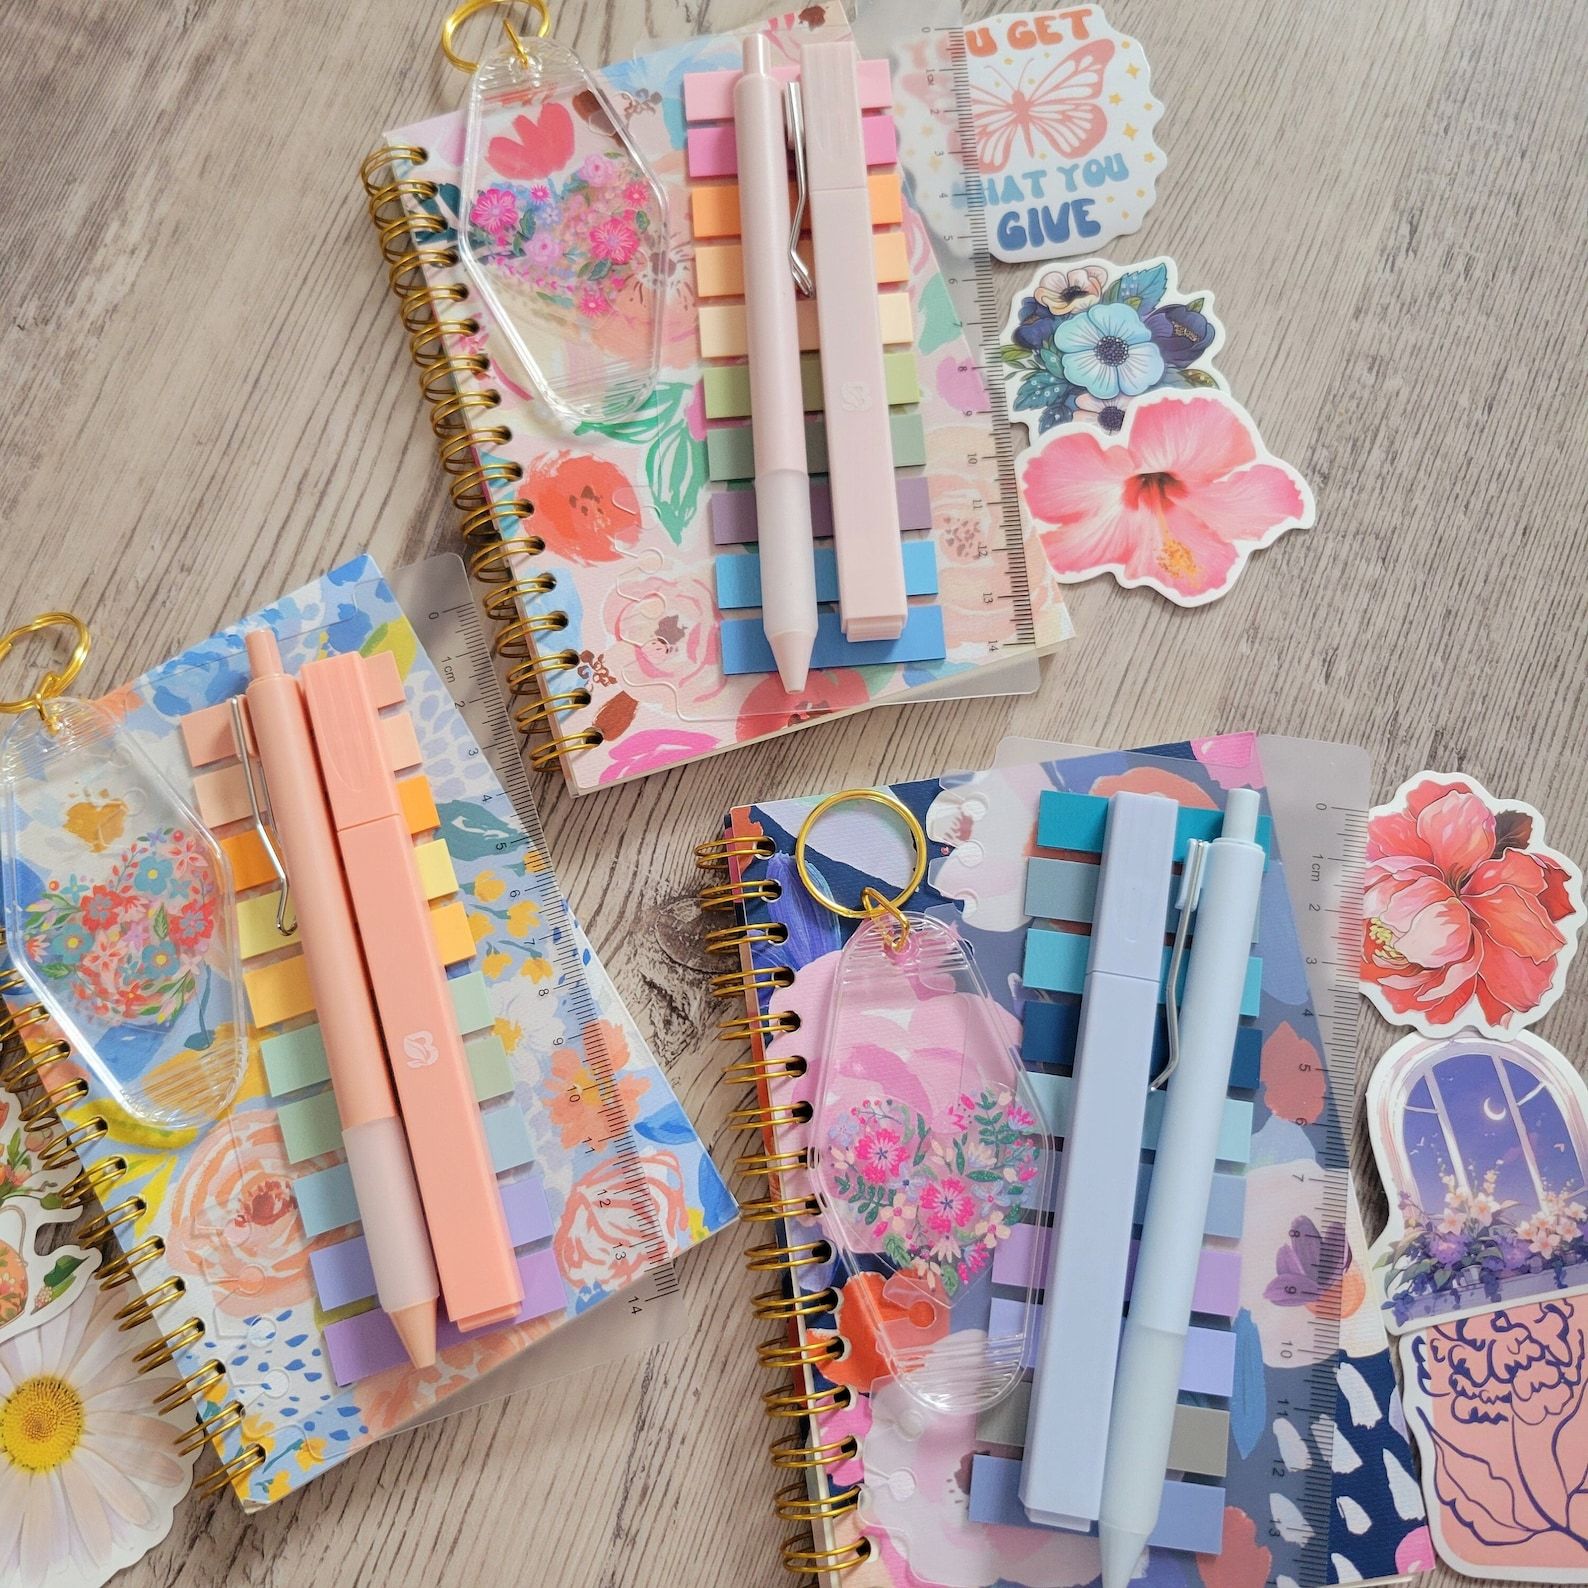 A set of three different floral annotation kits, including pen and highlighter, flags, a notebook, stickers, and a keychain